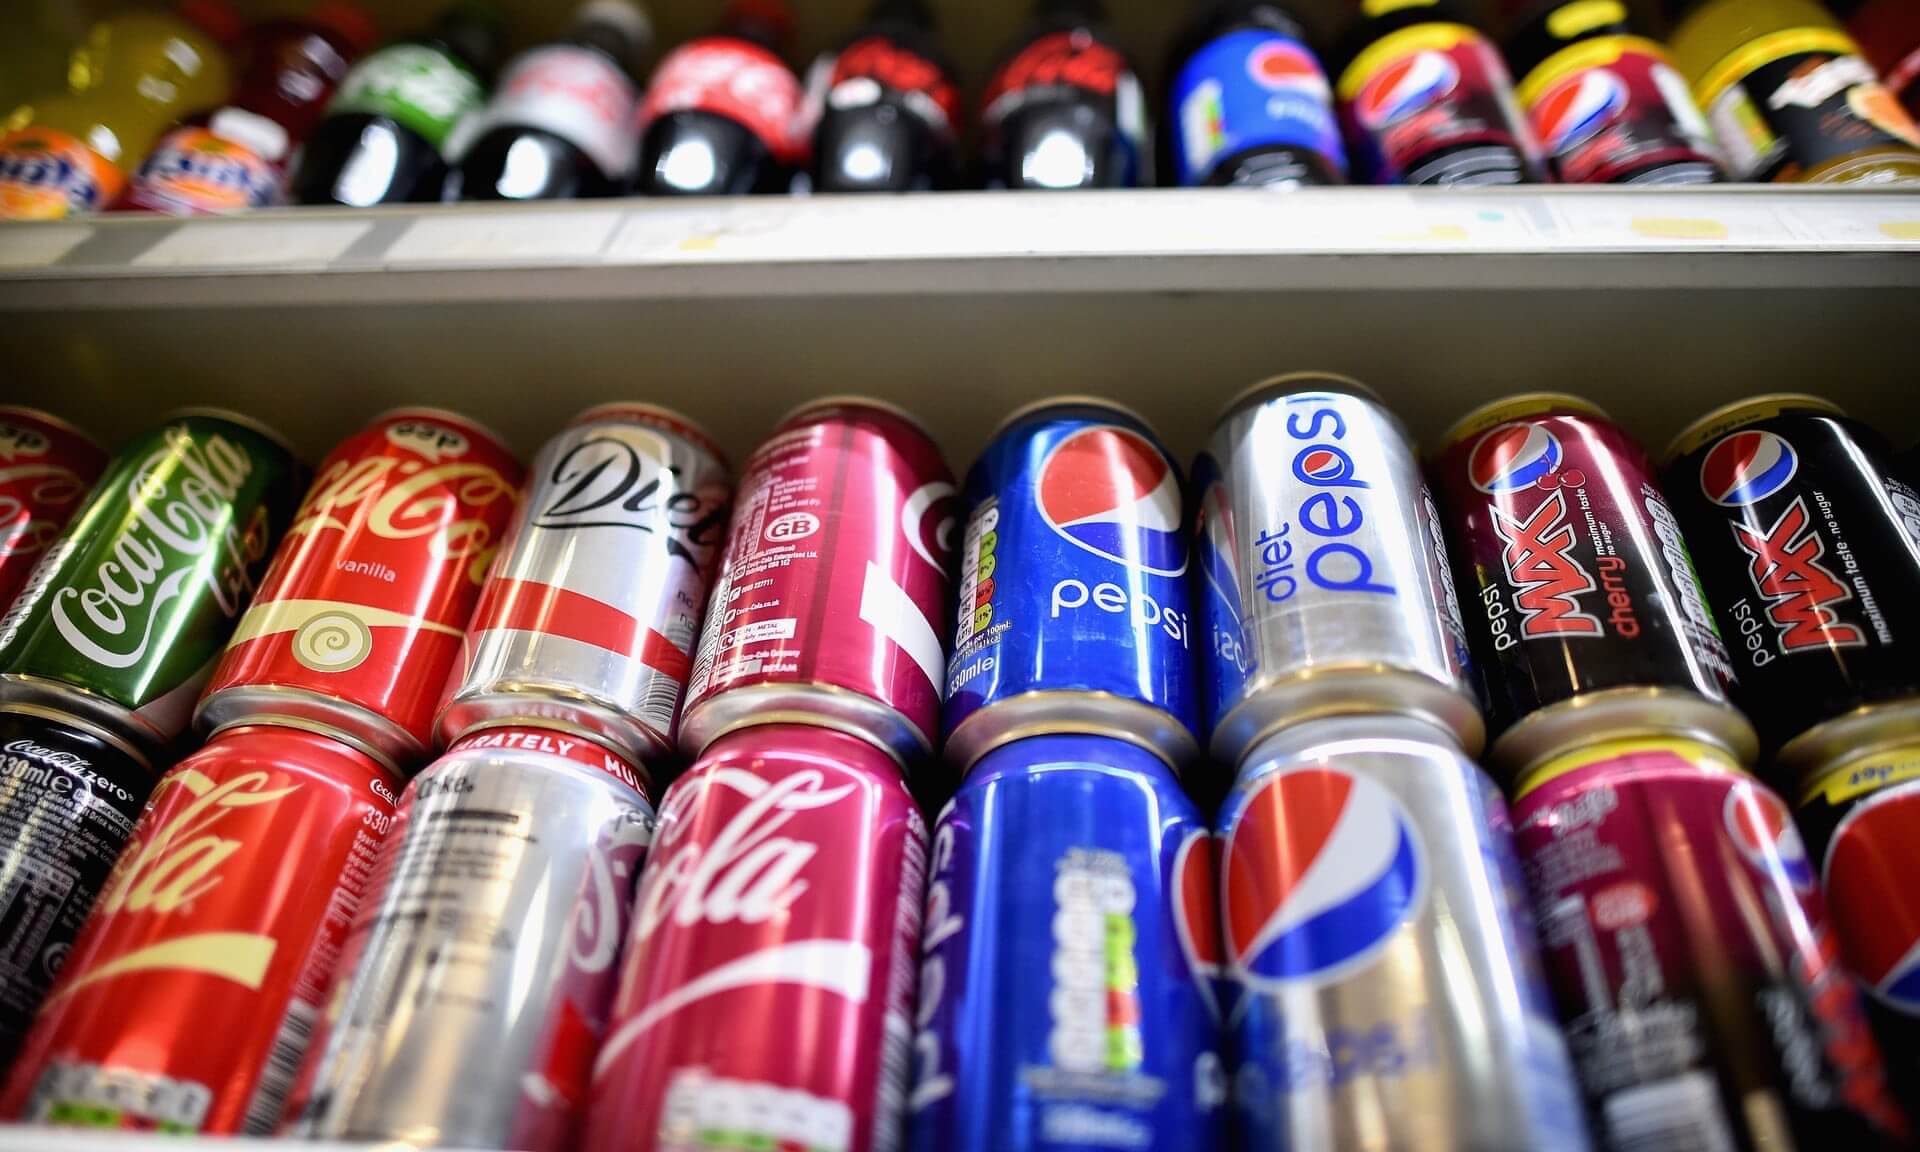 Frequent consumption of sugary drinks is the cause of premature death